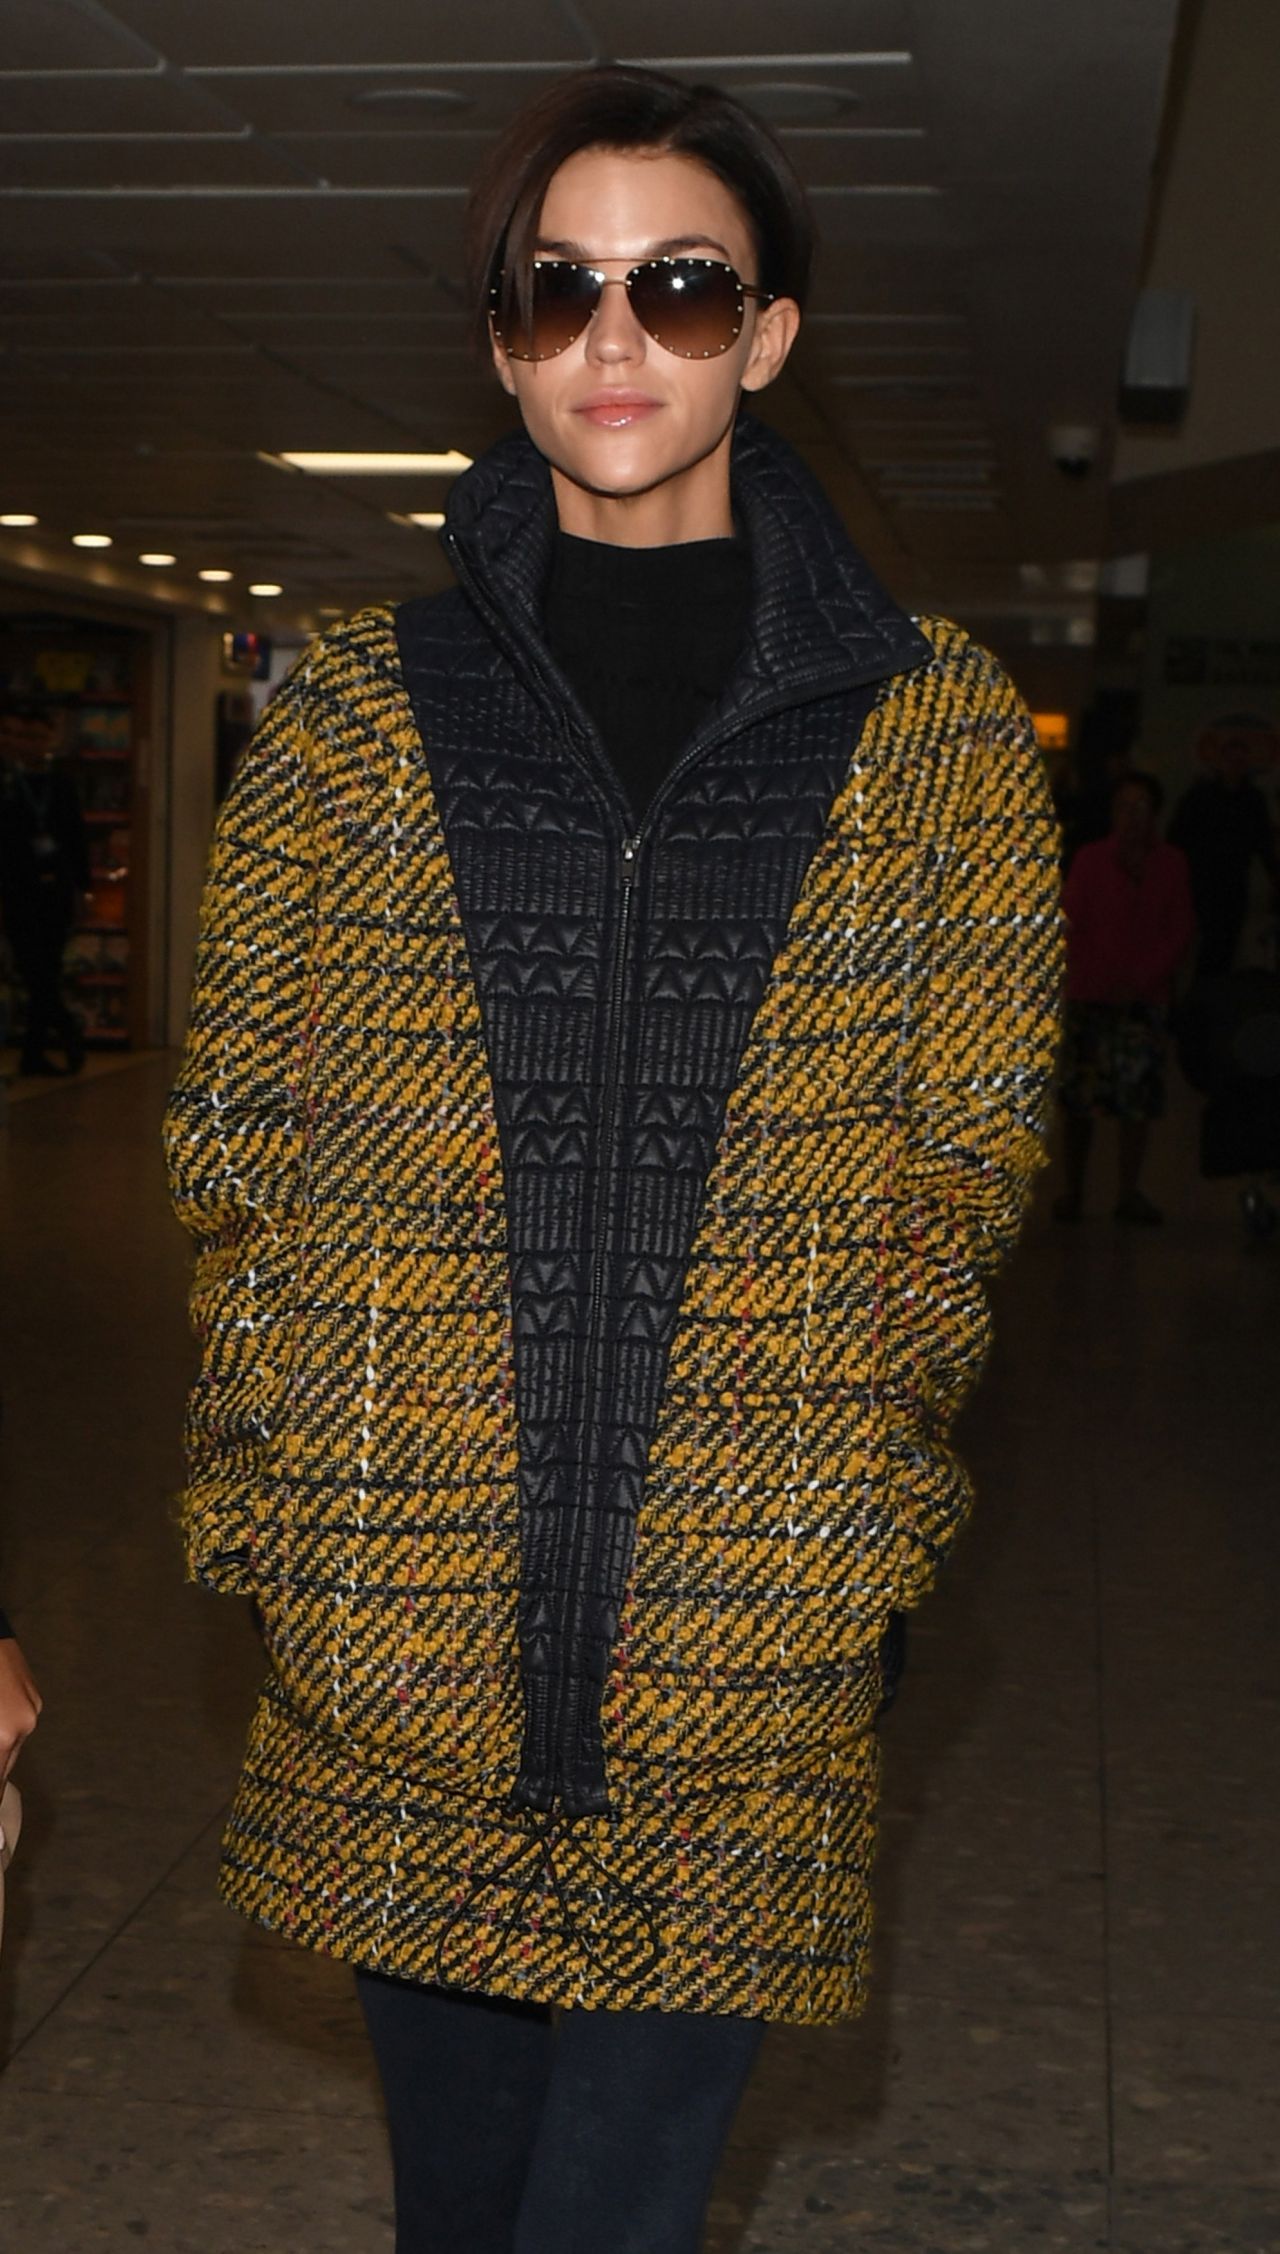 Ruby Rose Travel Outfit - Heathrow Airport in London 1/10 